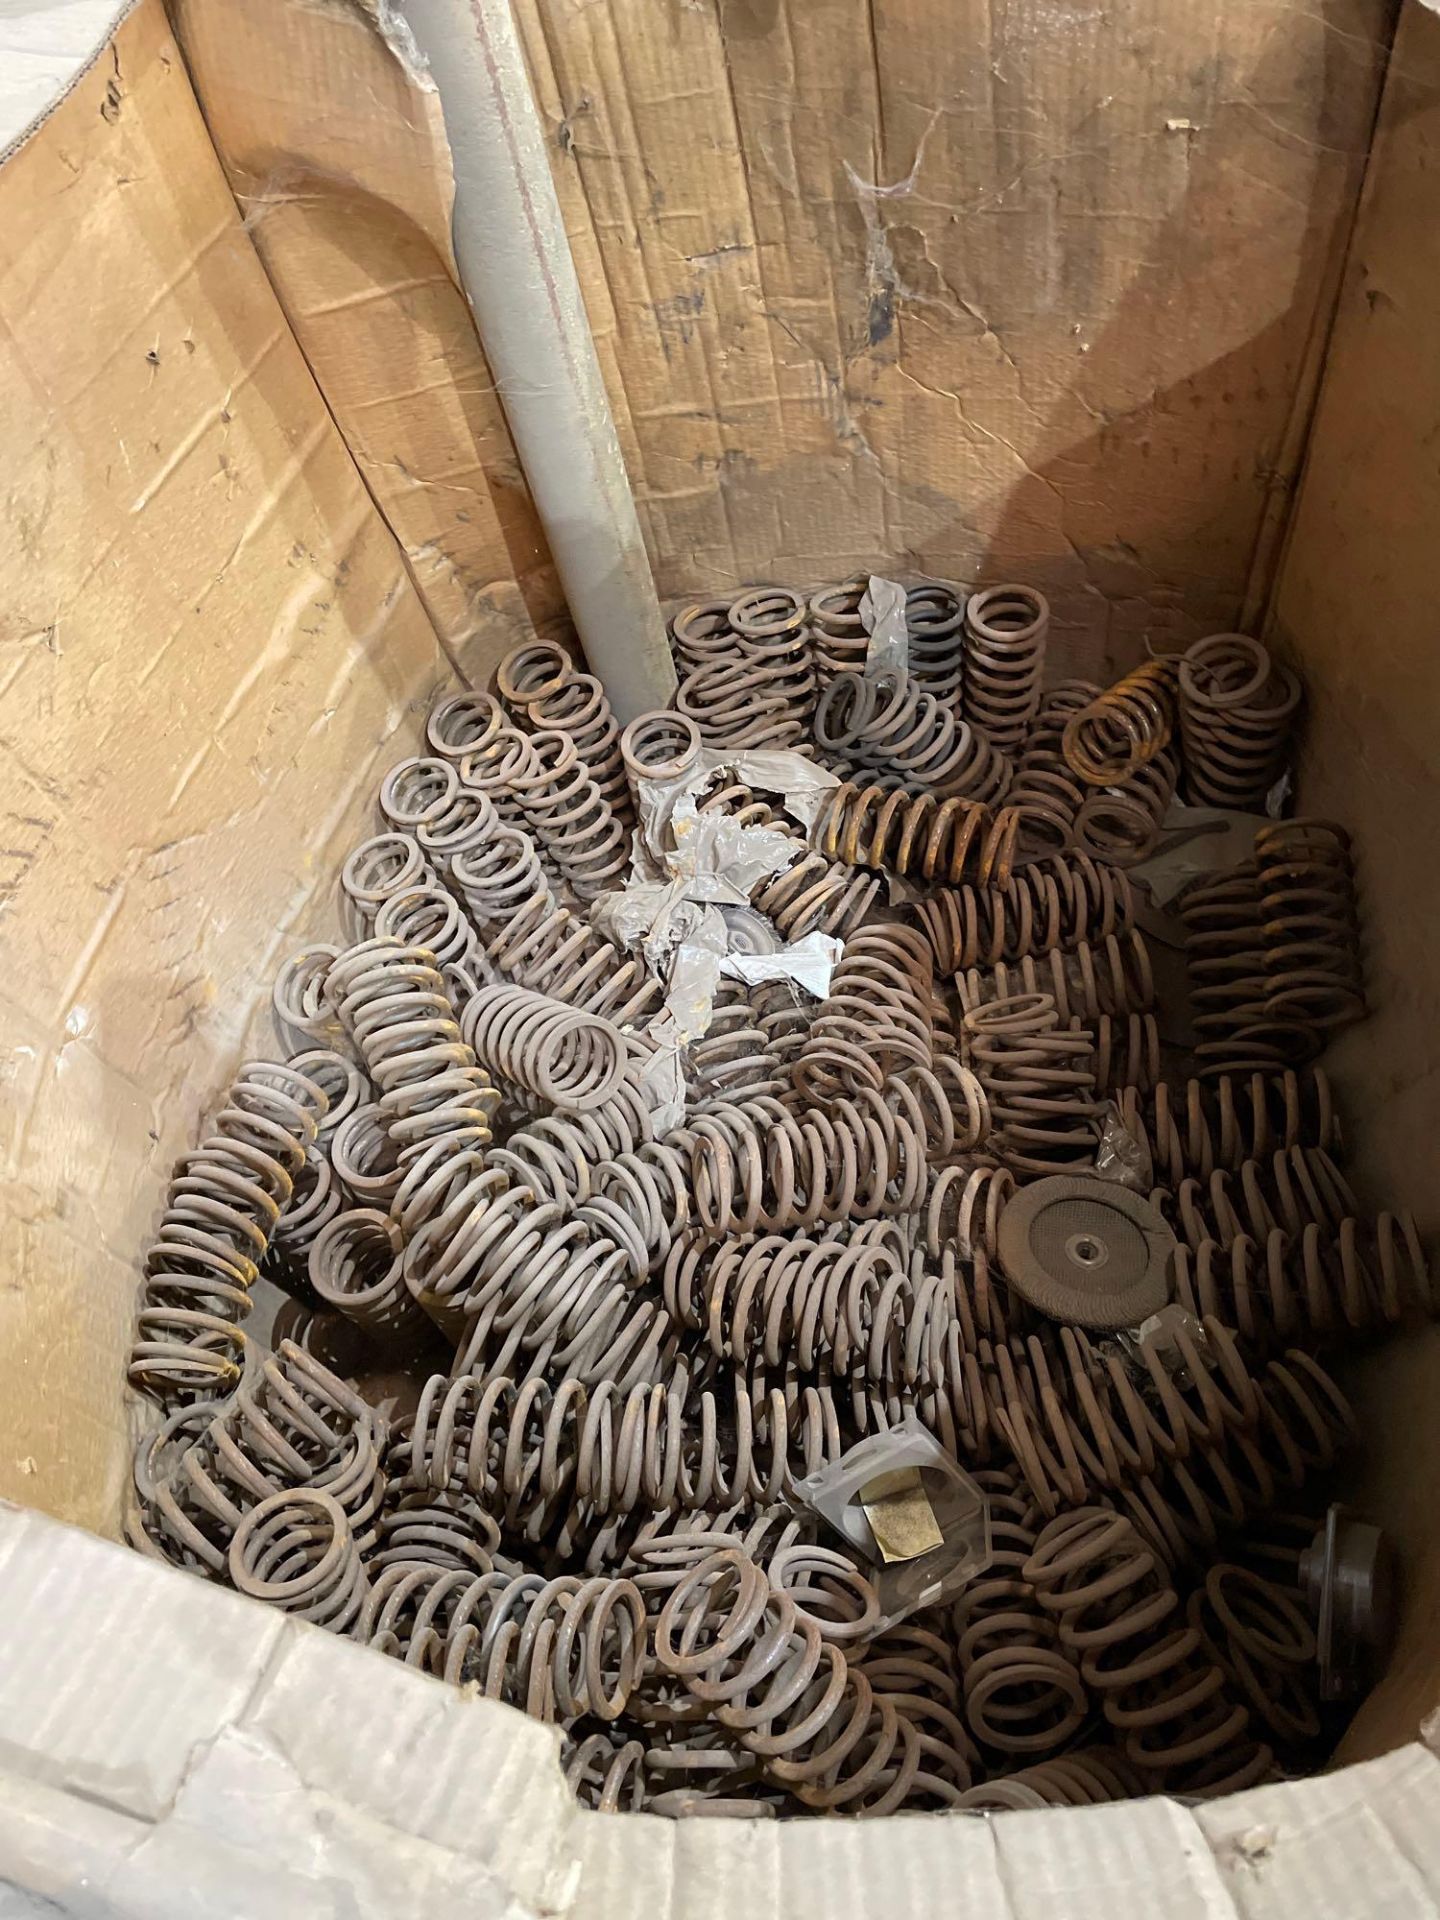 Box of Springs - Image 2 of 3